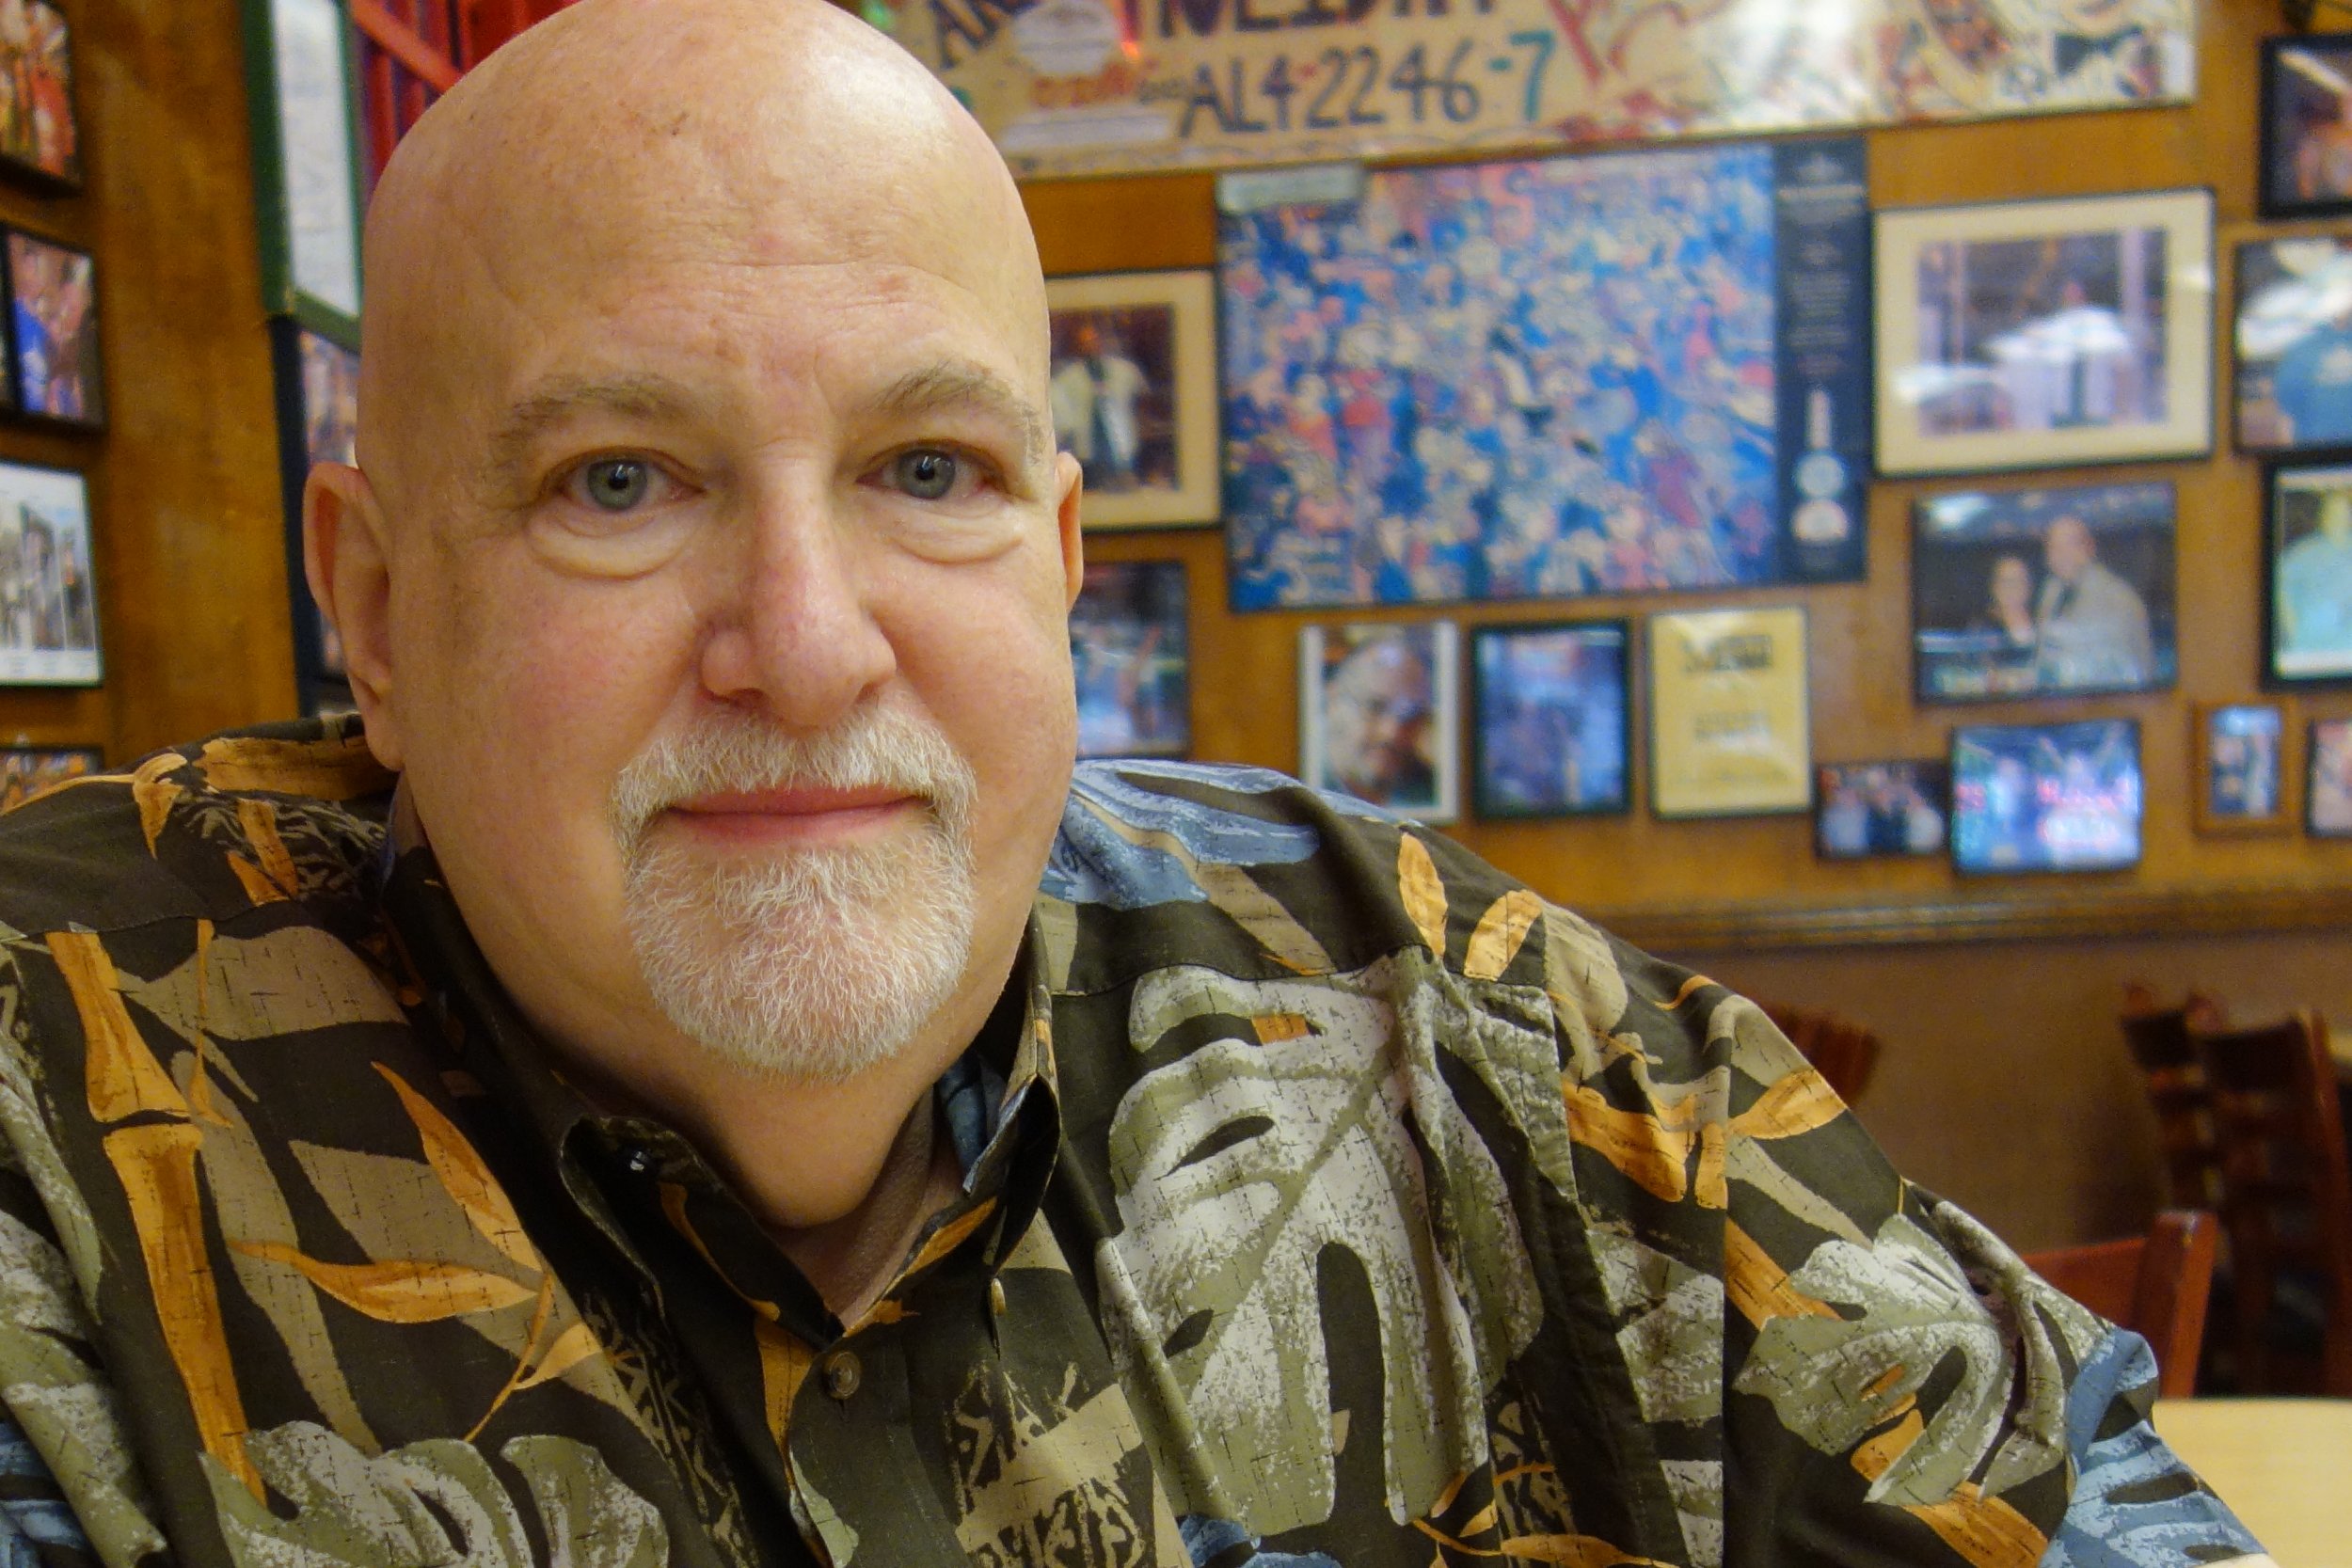 Fred Austin, who has co-owned Katz's Deli since 1988, enjoys an early breakfast on Saturday morning.